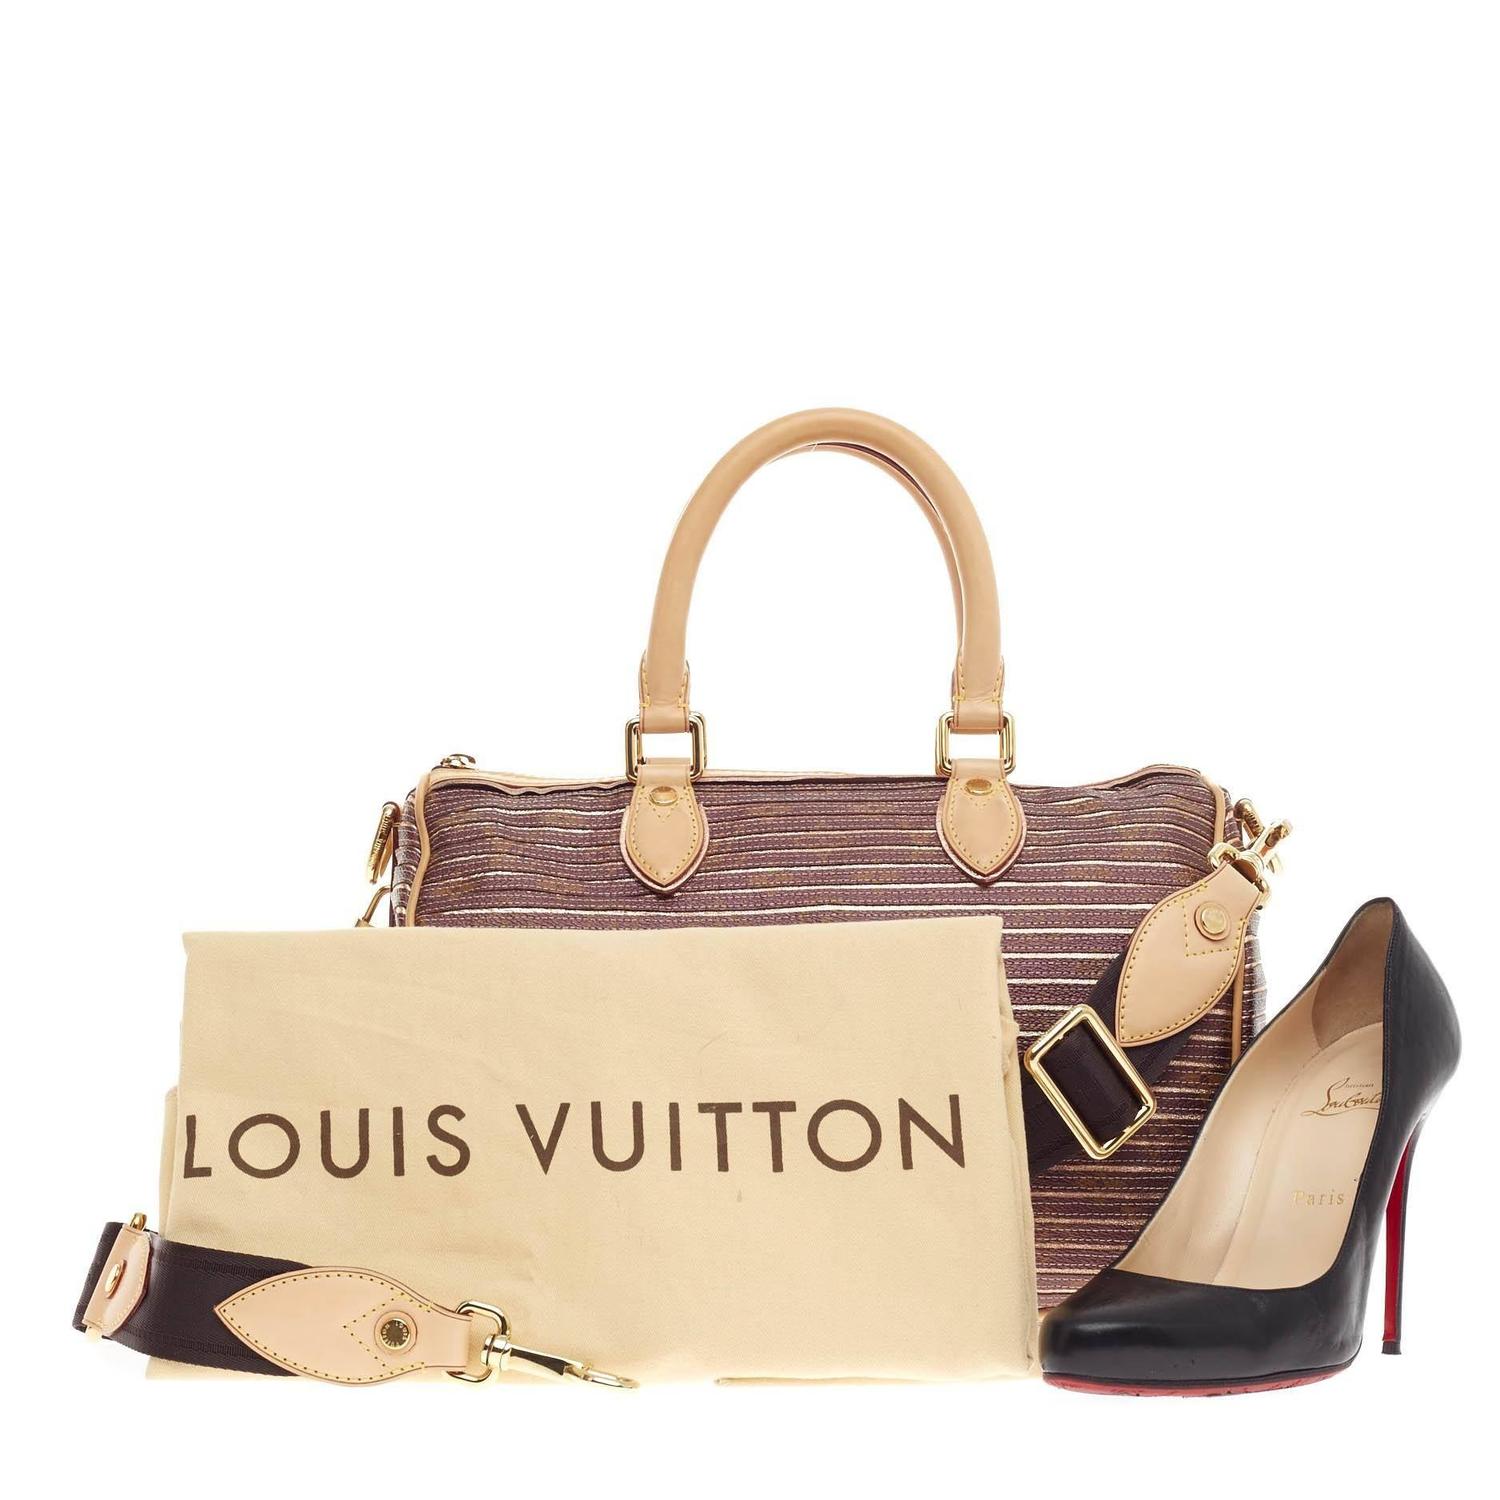 Louis Vuitton Speedy Eden Peche | Confederated Tribes of the Umatilla Indian Reservation